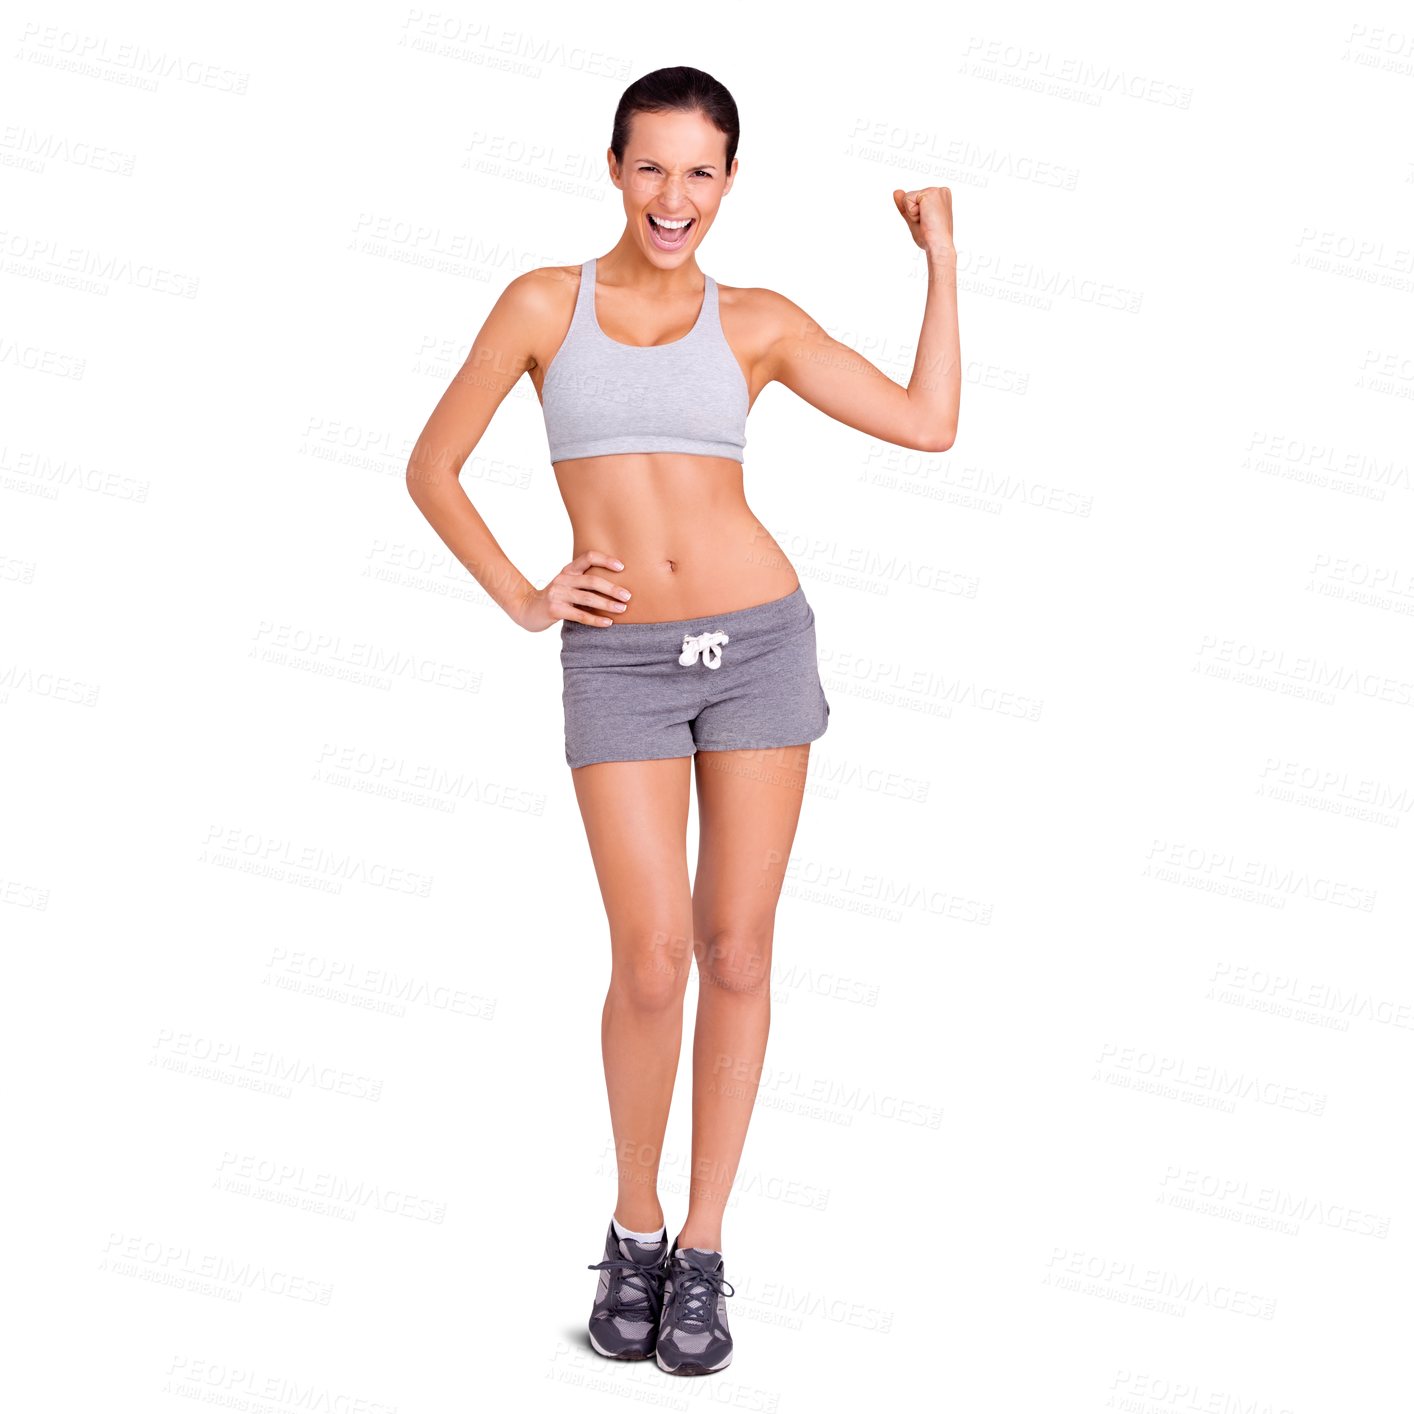 Buy stock photo Fitness, exercise and healthy body of a woman with a muscle flex after workout or training on a png, transparent and mockup or isolated background. A girl feeling fit, strong and confident in sport